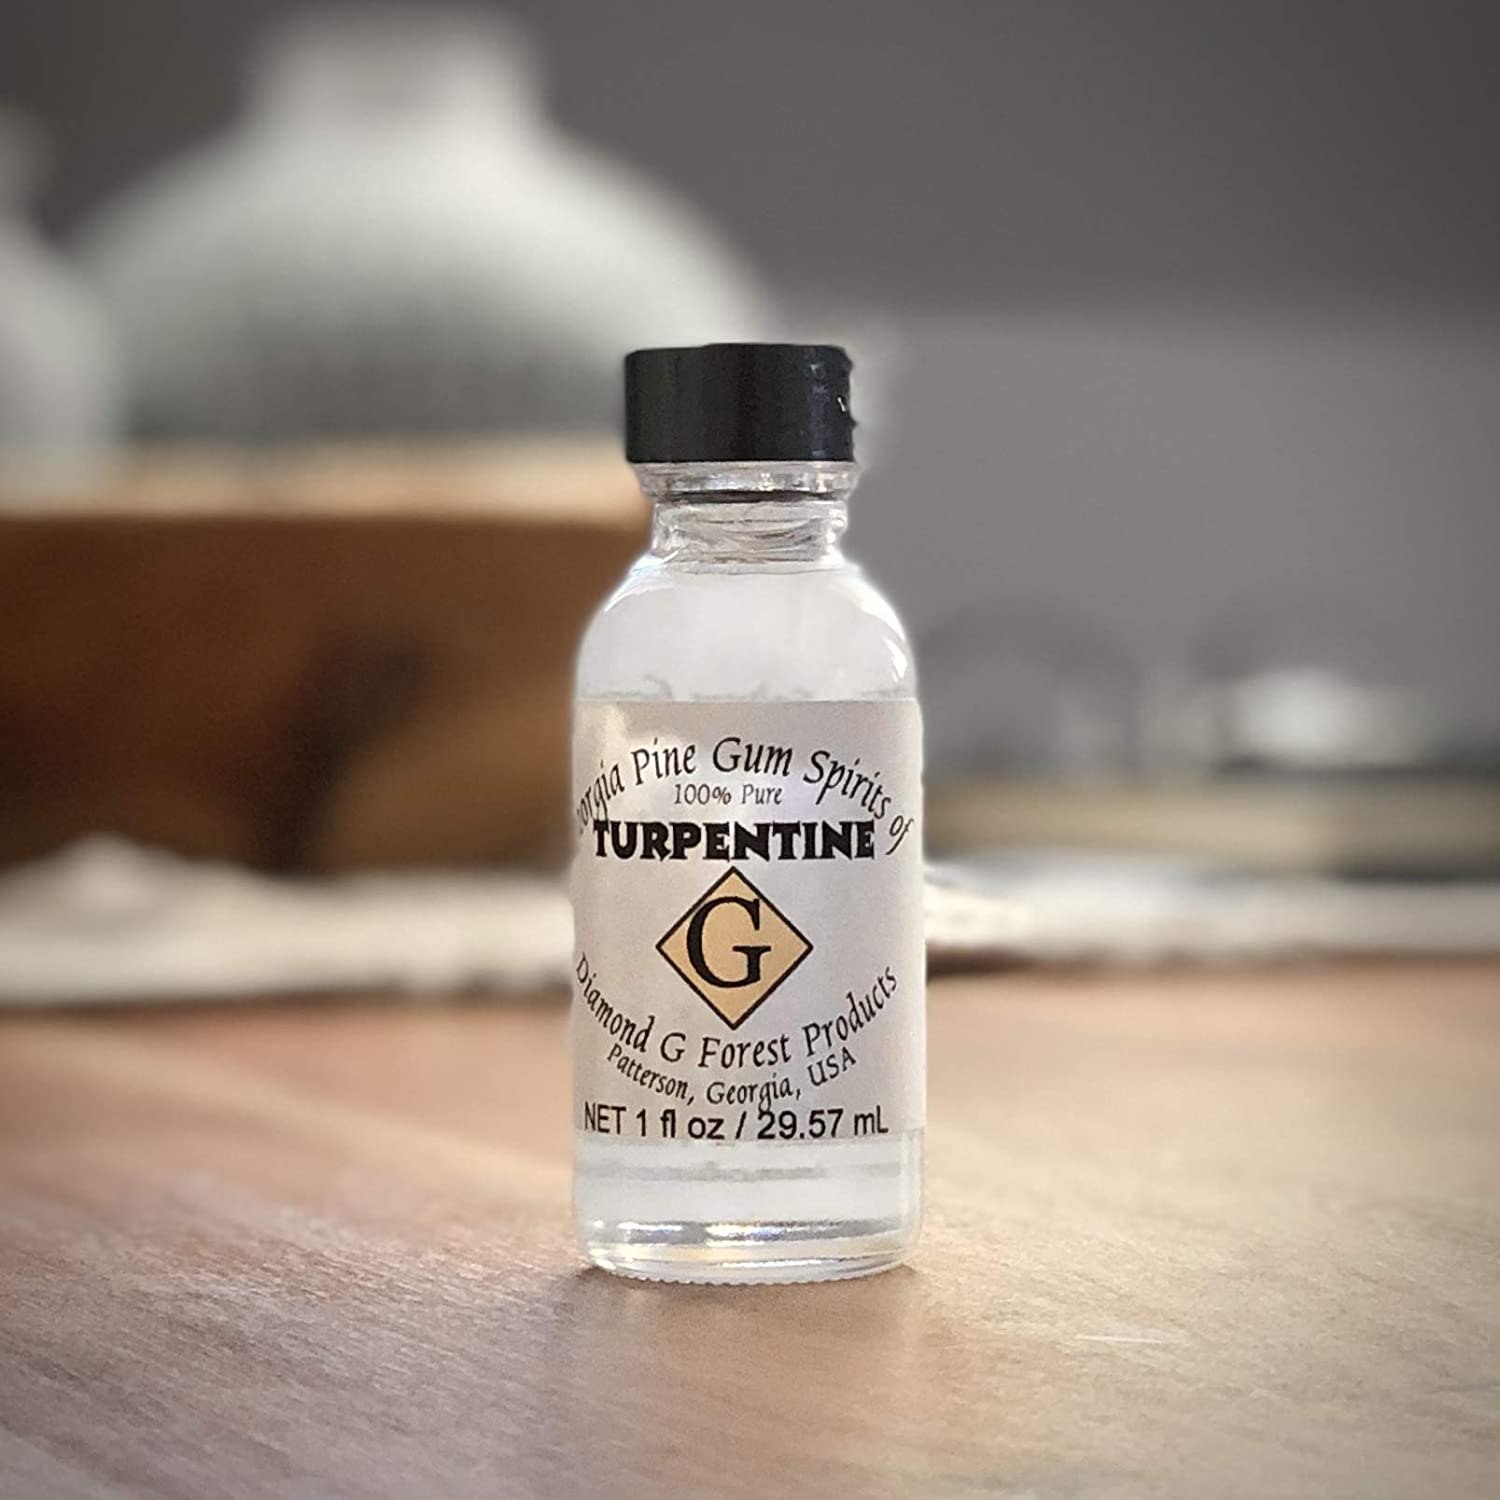 Diamond G Forest 100% Pure Gum Spirits of Turpentine - 1oz Bottle – E-Tail  24/7 Limited